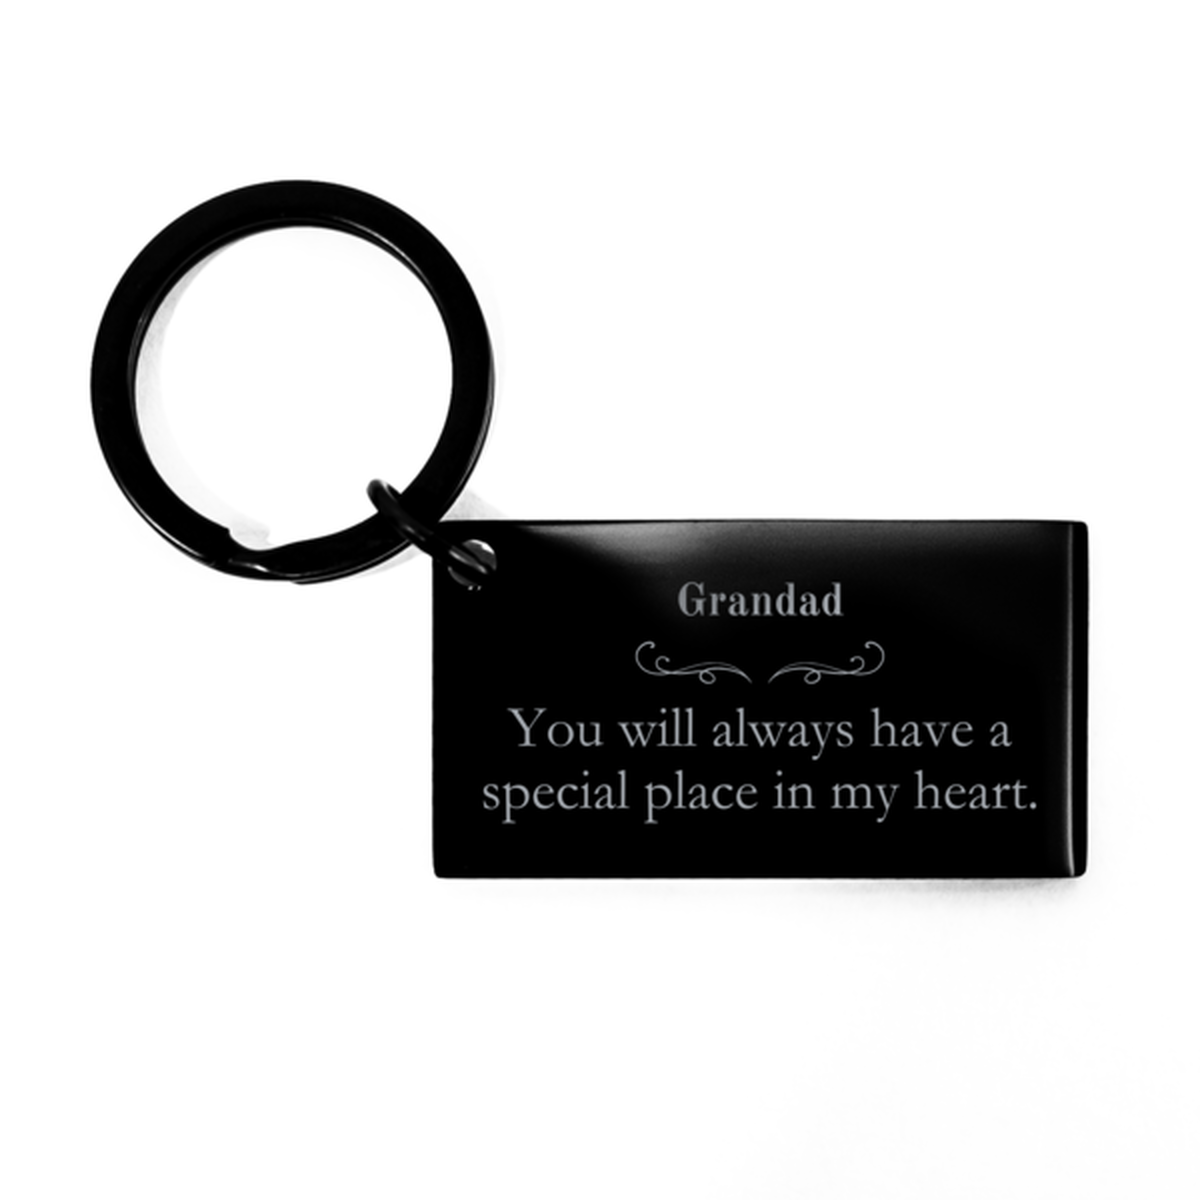 Grandad Keychain Engraved Special Place Heart Gift Birthday Christmas Veterans Day